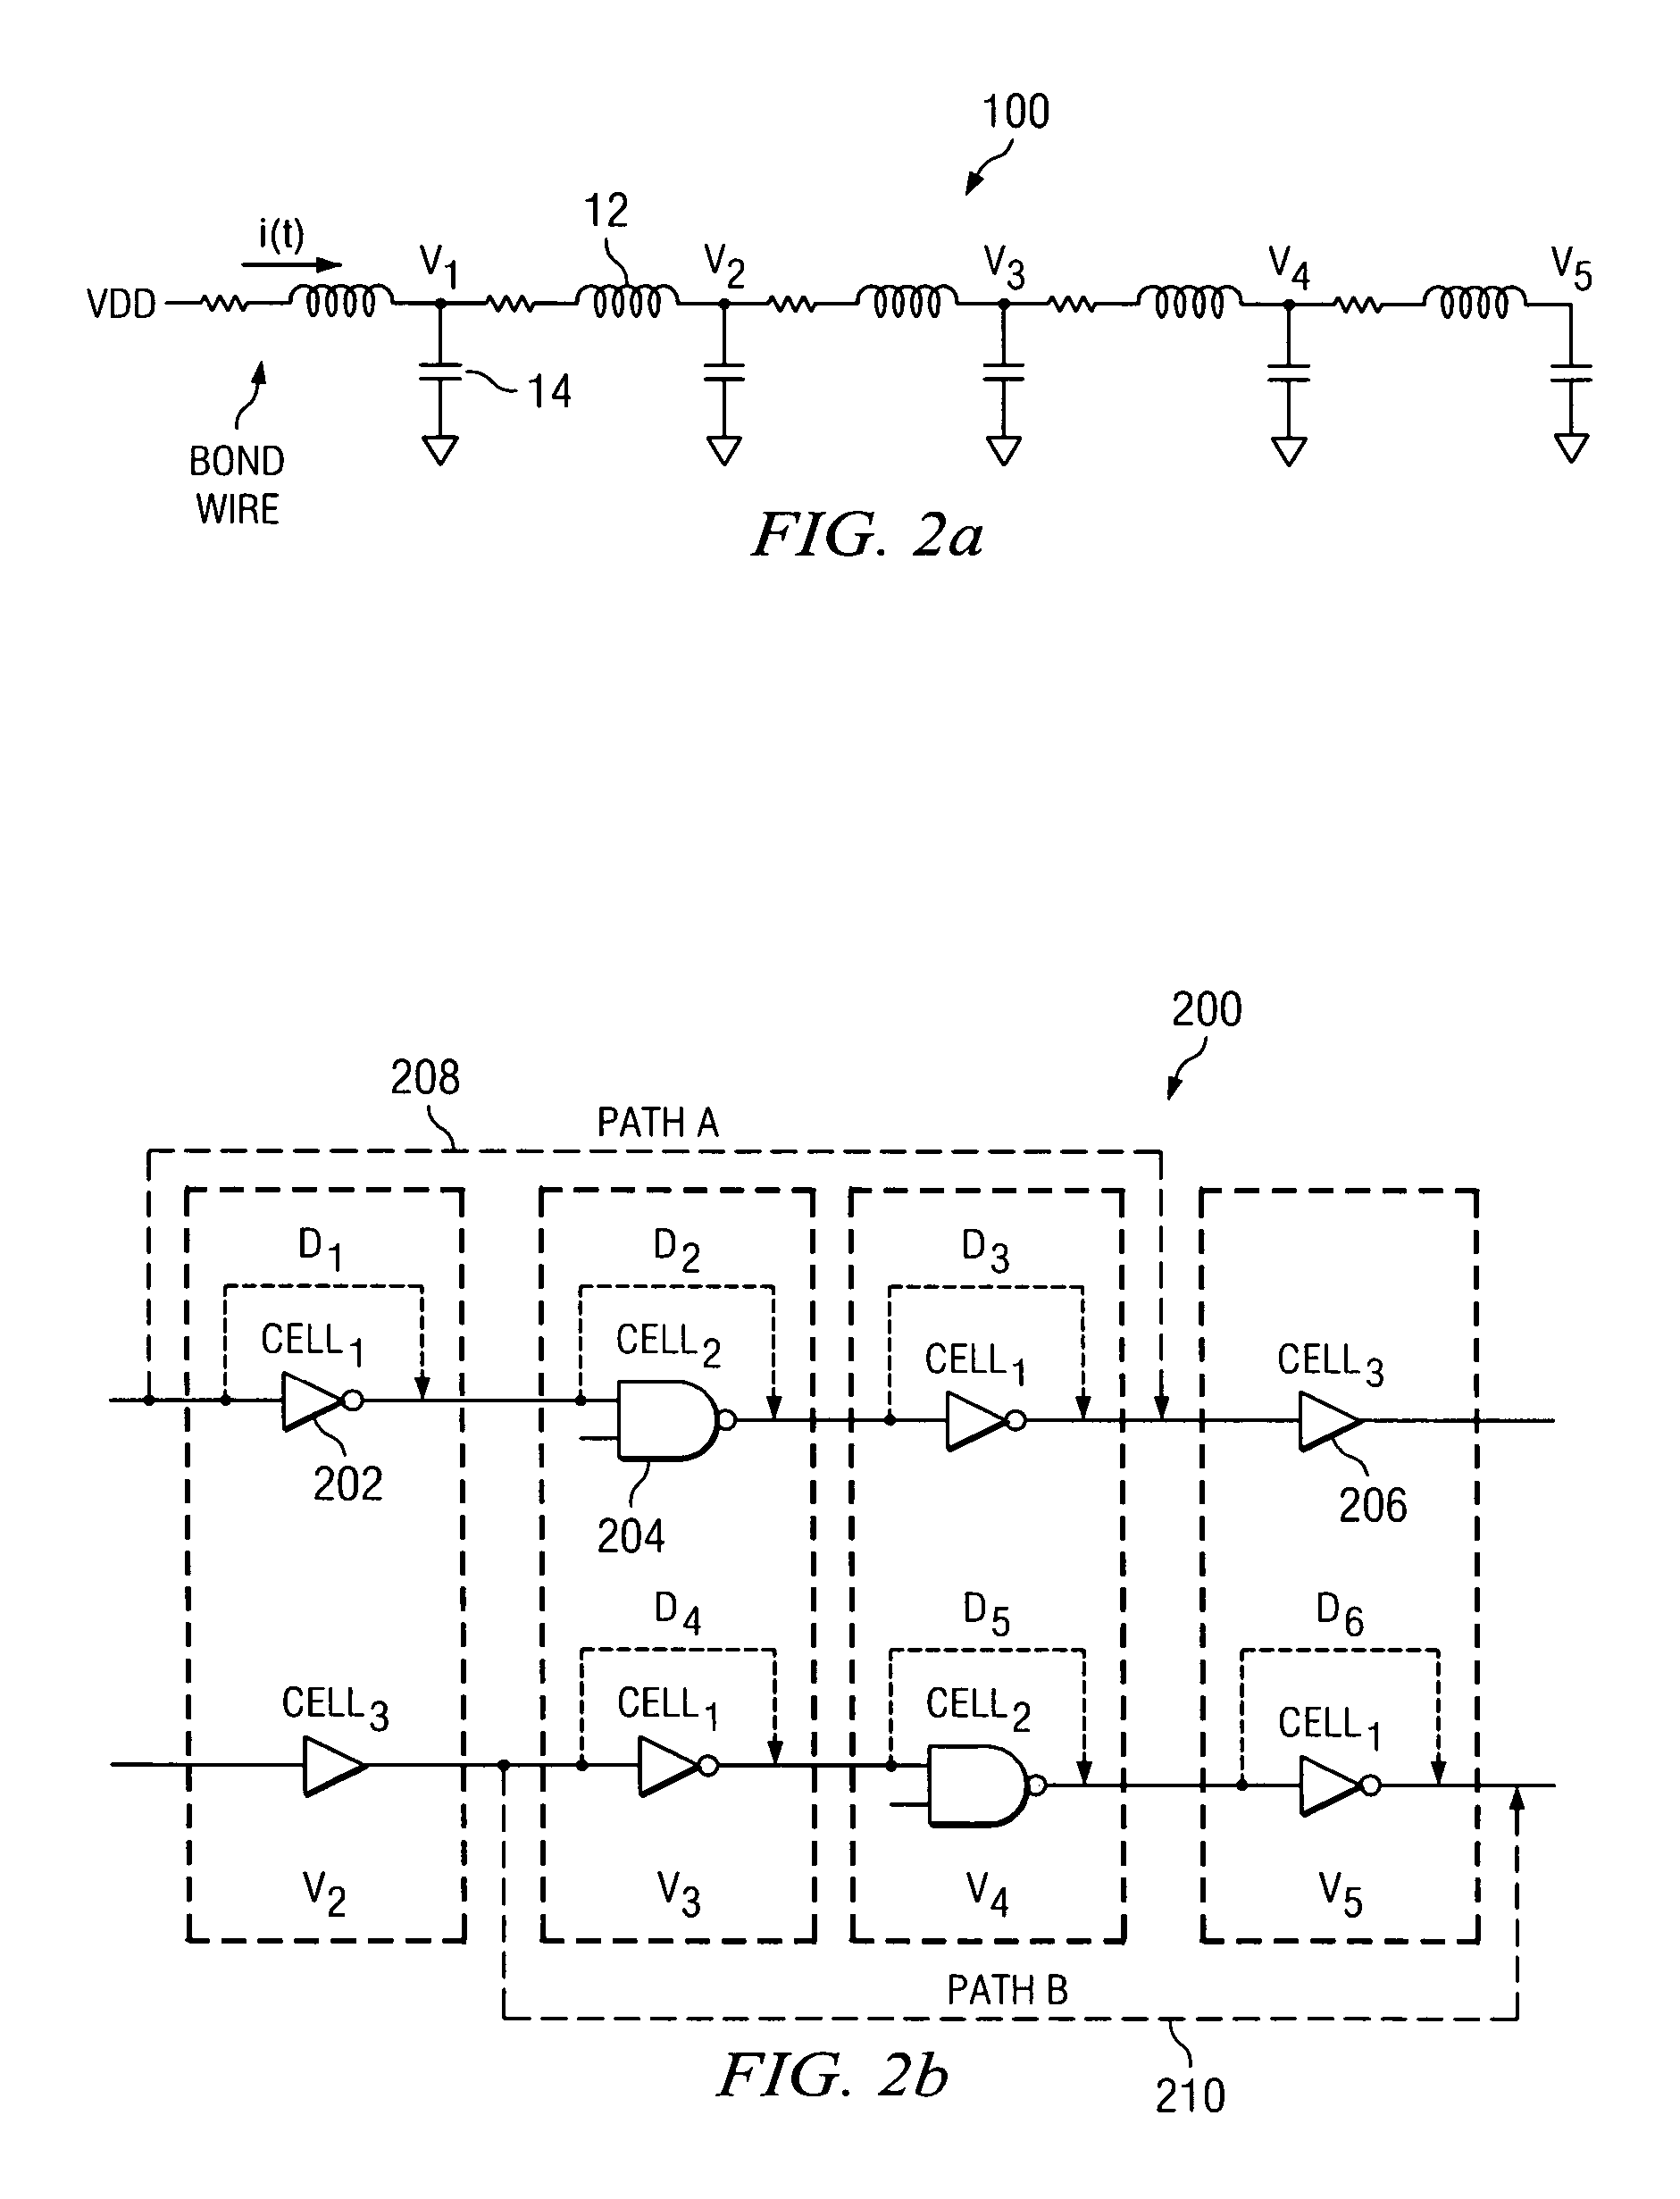 Timing closure for system on a chip using voltage drop based standard delay formats